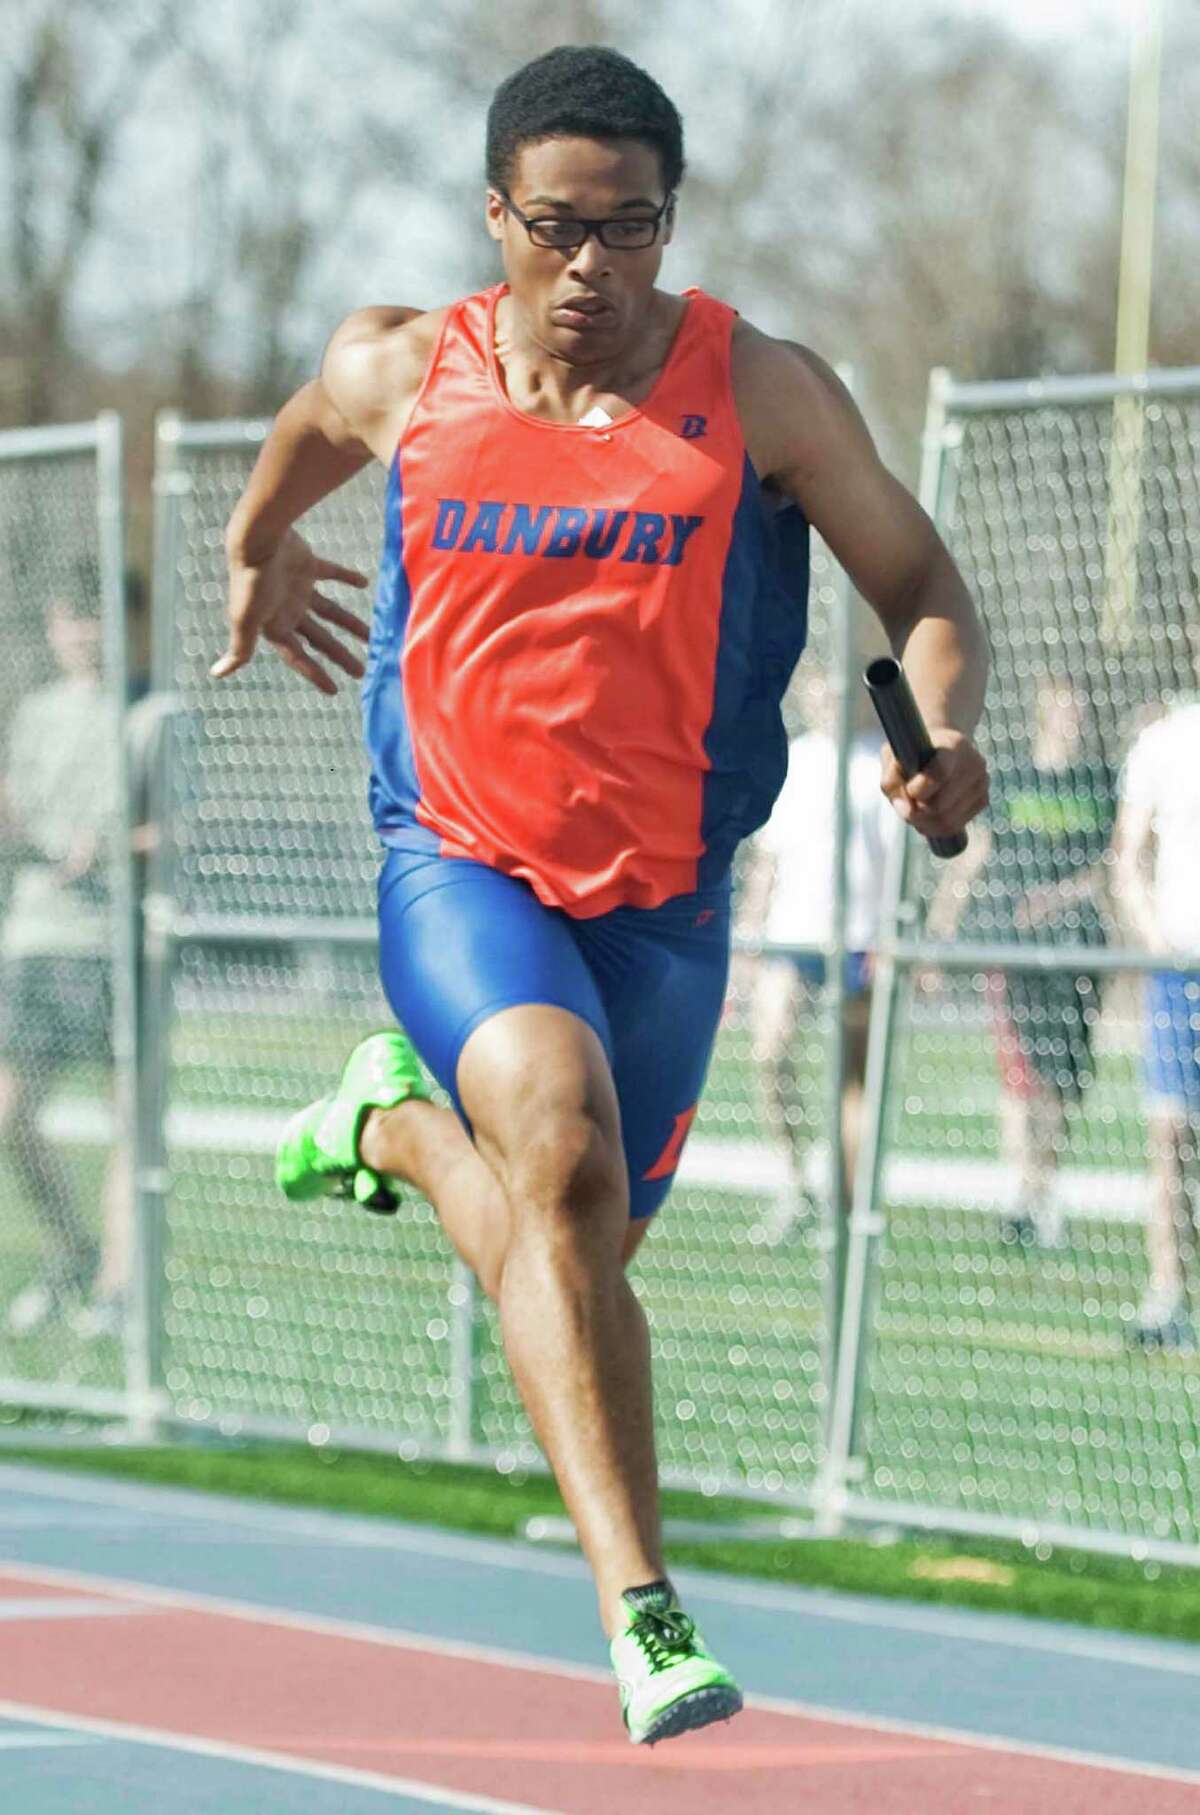 Danbury High School senior Micaiah Hill comes to the line in the 4X100 relay in the boys track meet at Danbury. Tuesday, April 9, 2013